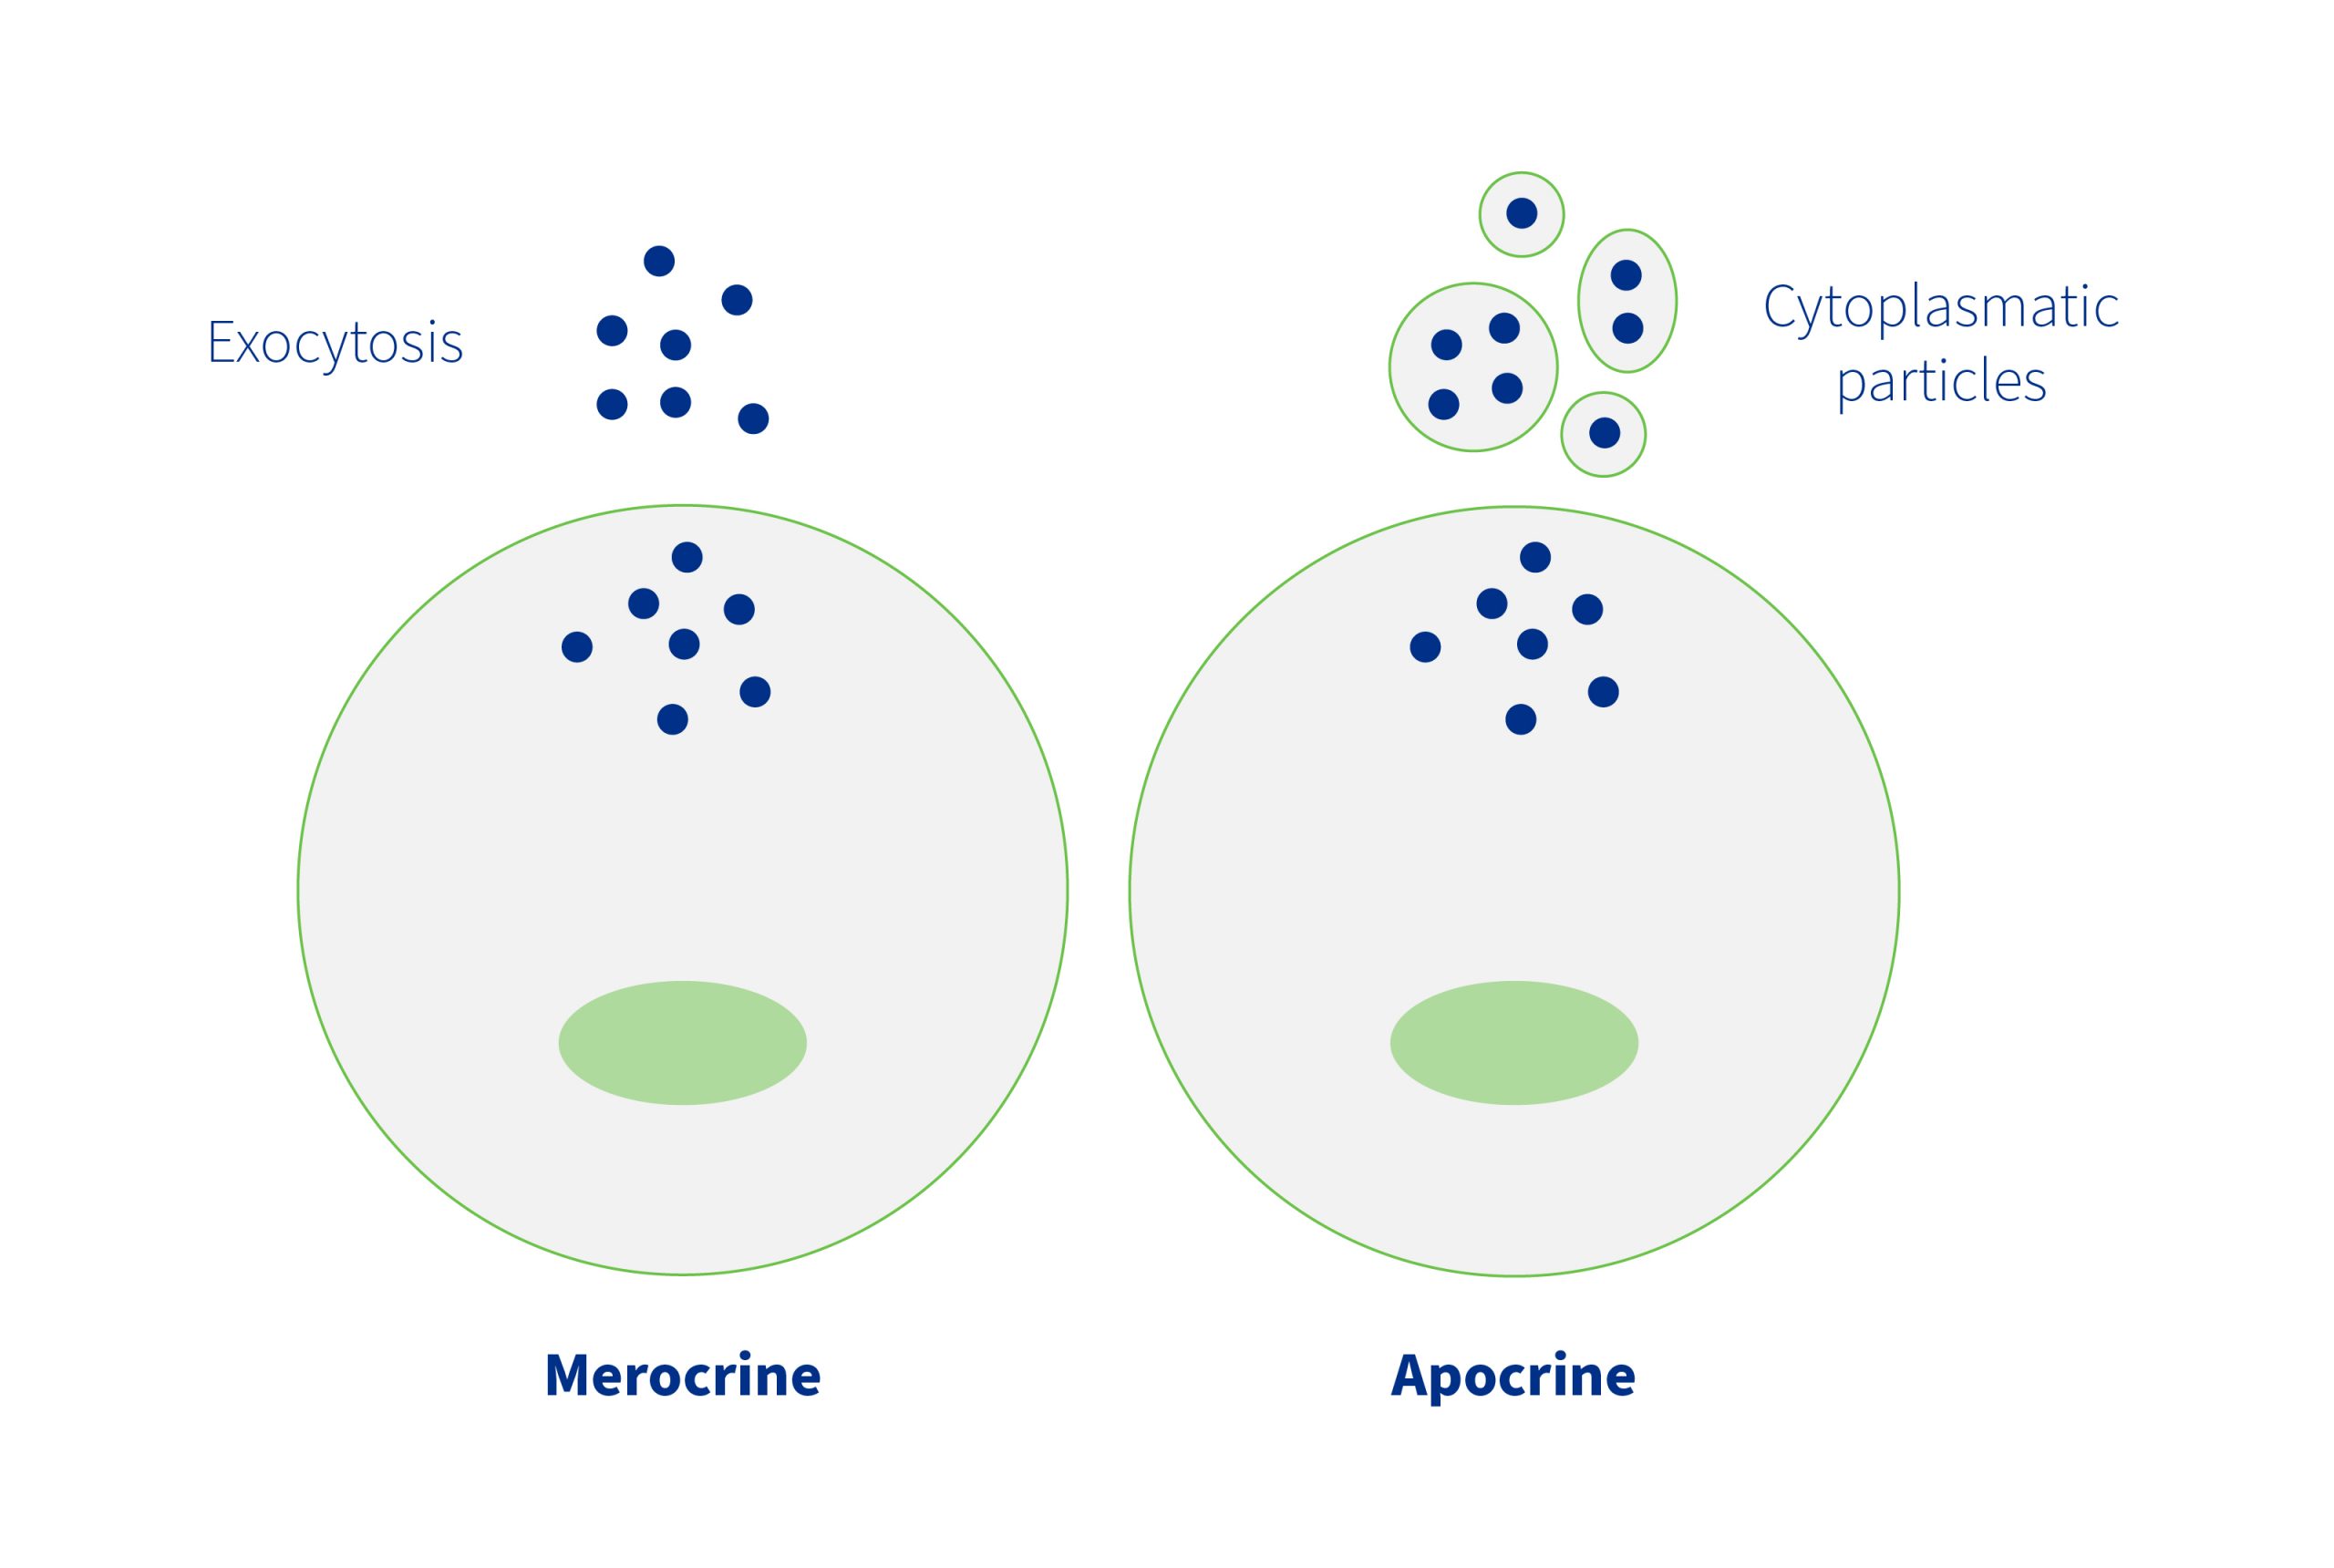 Secretion of milk components can be of the merocrine or apocrine type.